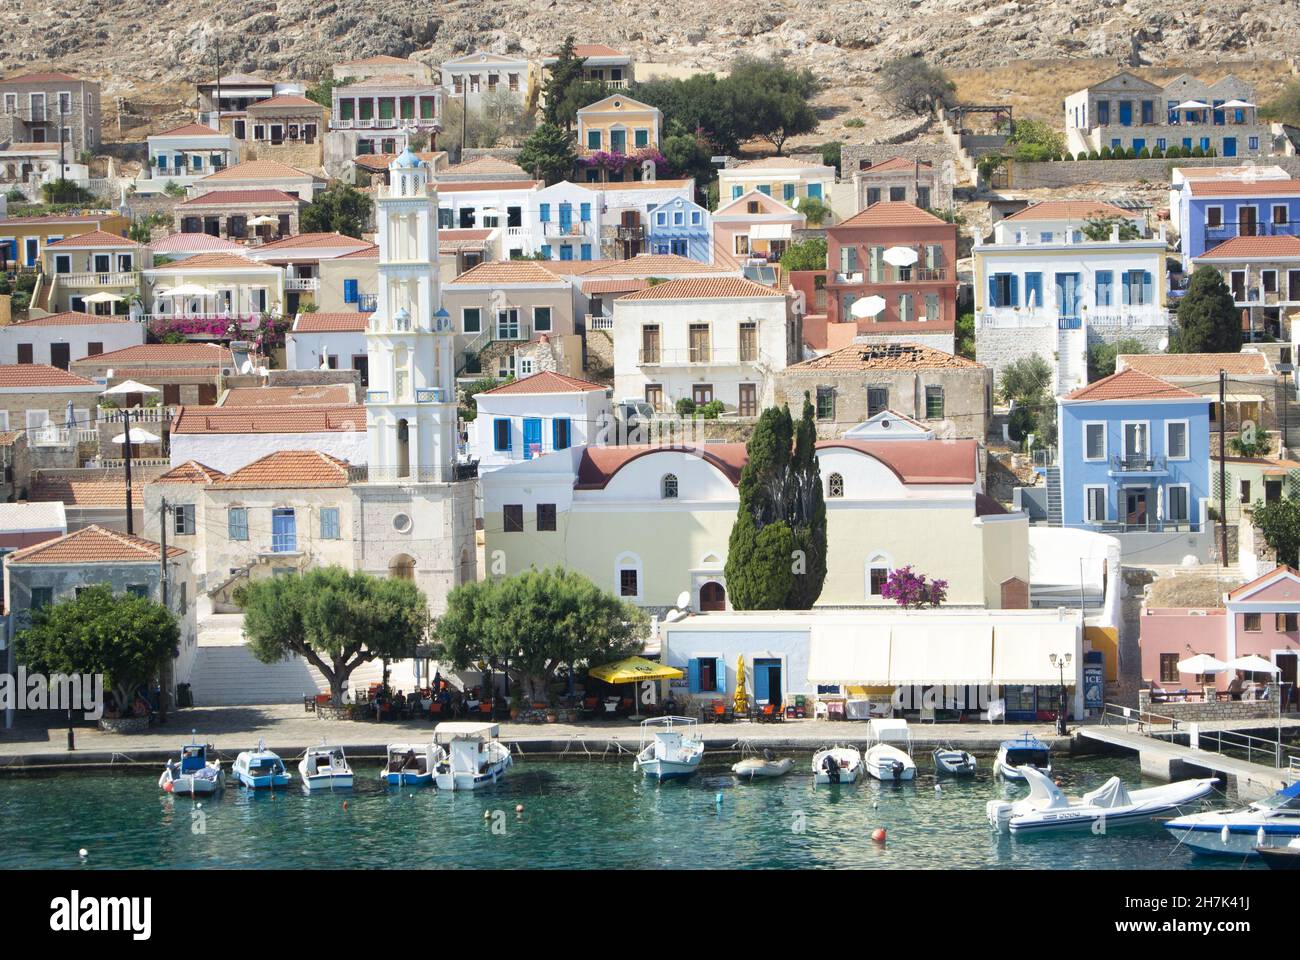 Chalki island - Greece - August 26 2014 : Charming harbor scene, port of Halki. View of elegant town houses around the colorful waterfront Stock Photo